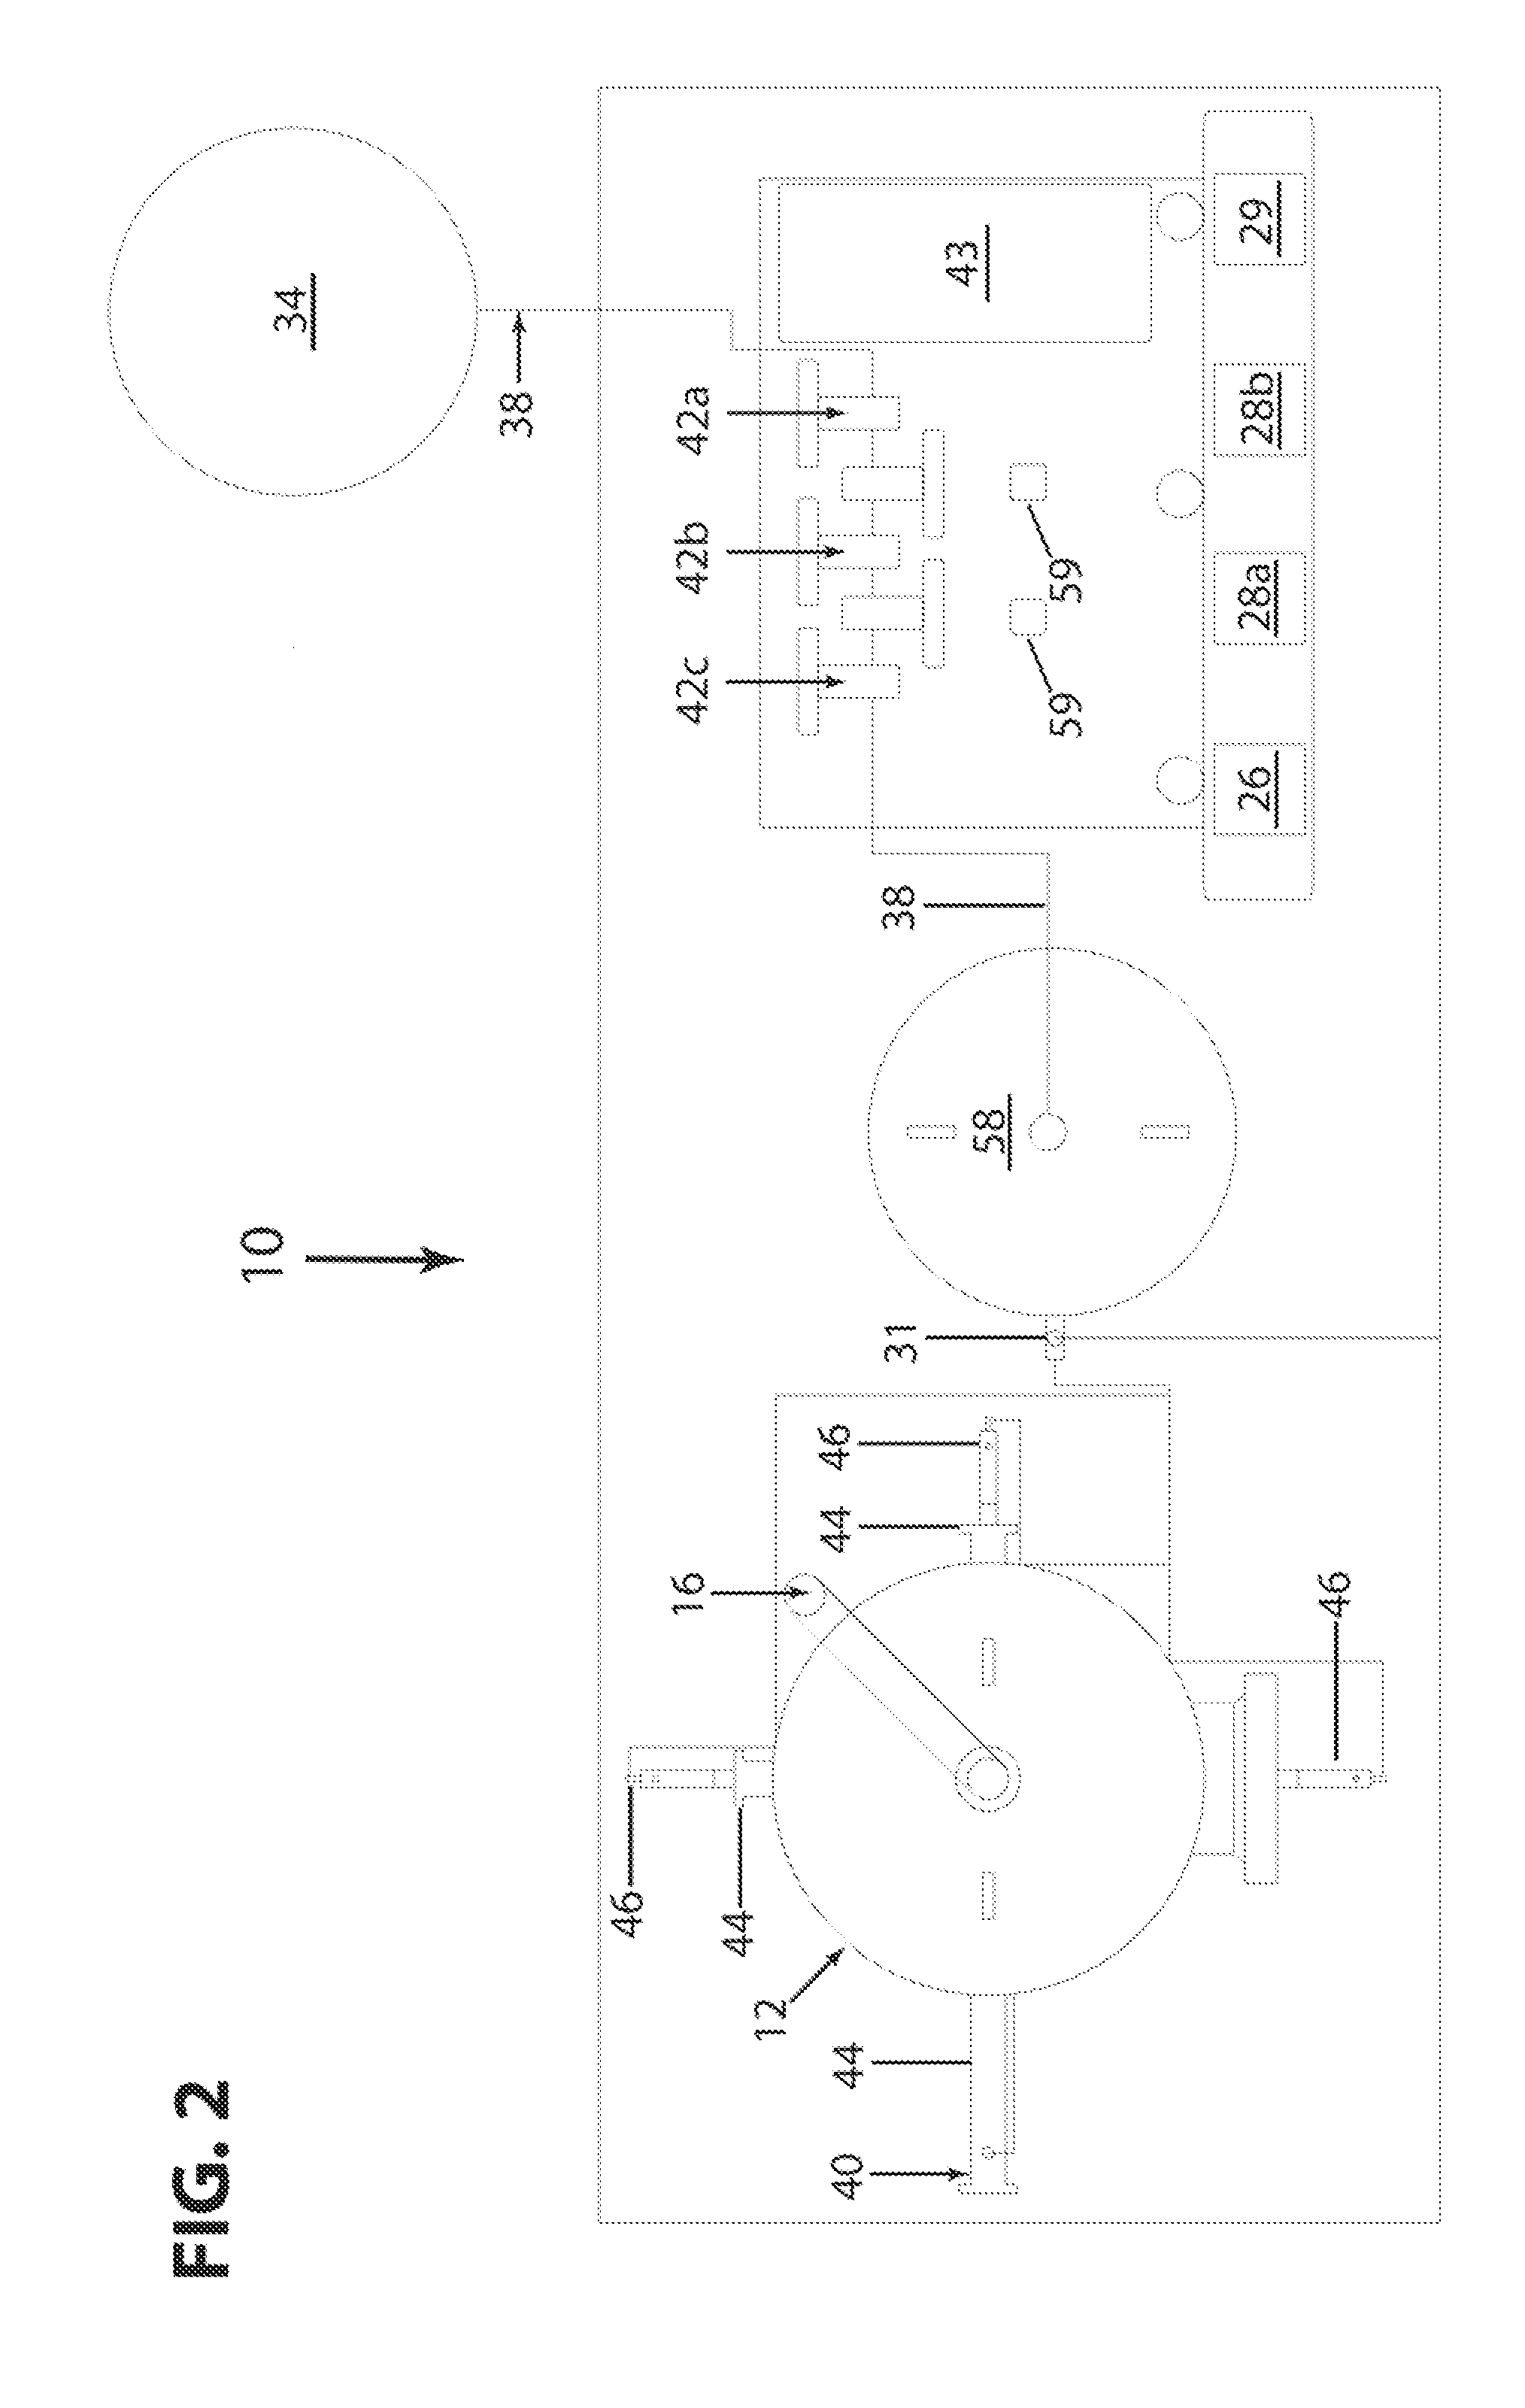 Process stream decontamination systems and methods